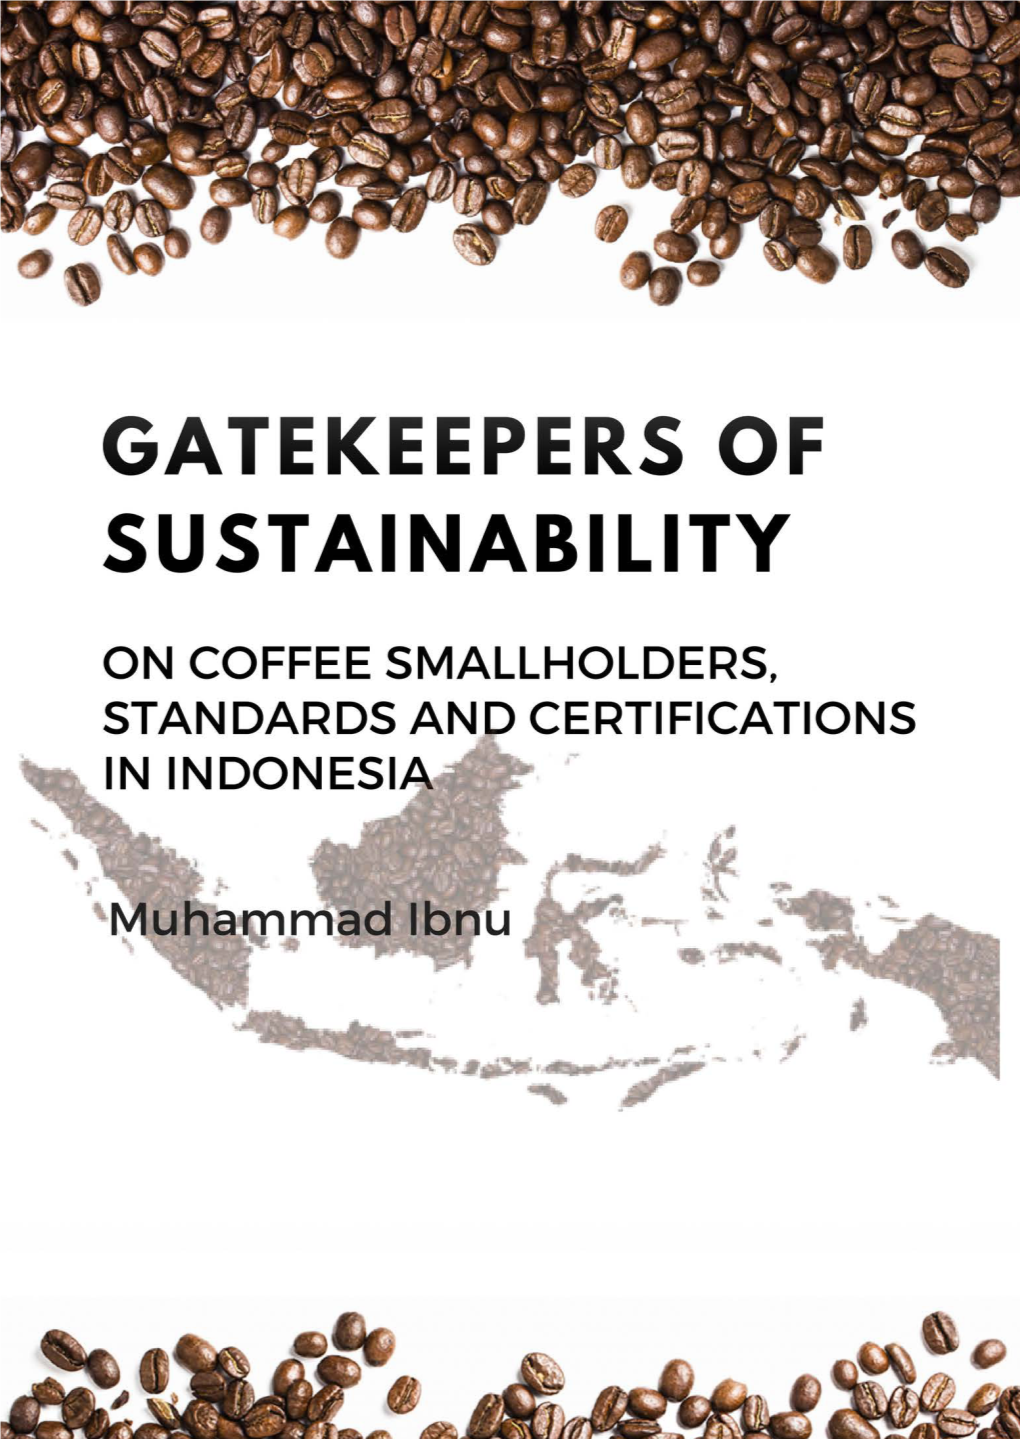 On Coffee Smallholders, Standards and Certifications in Indonesia